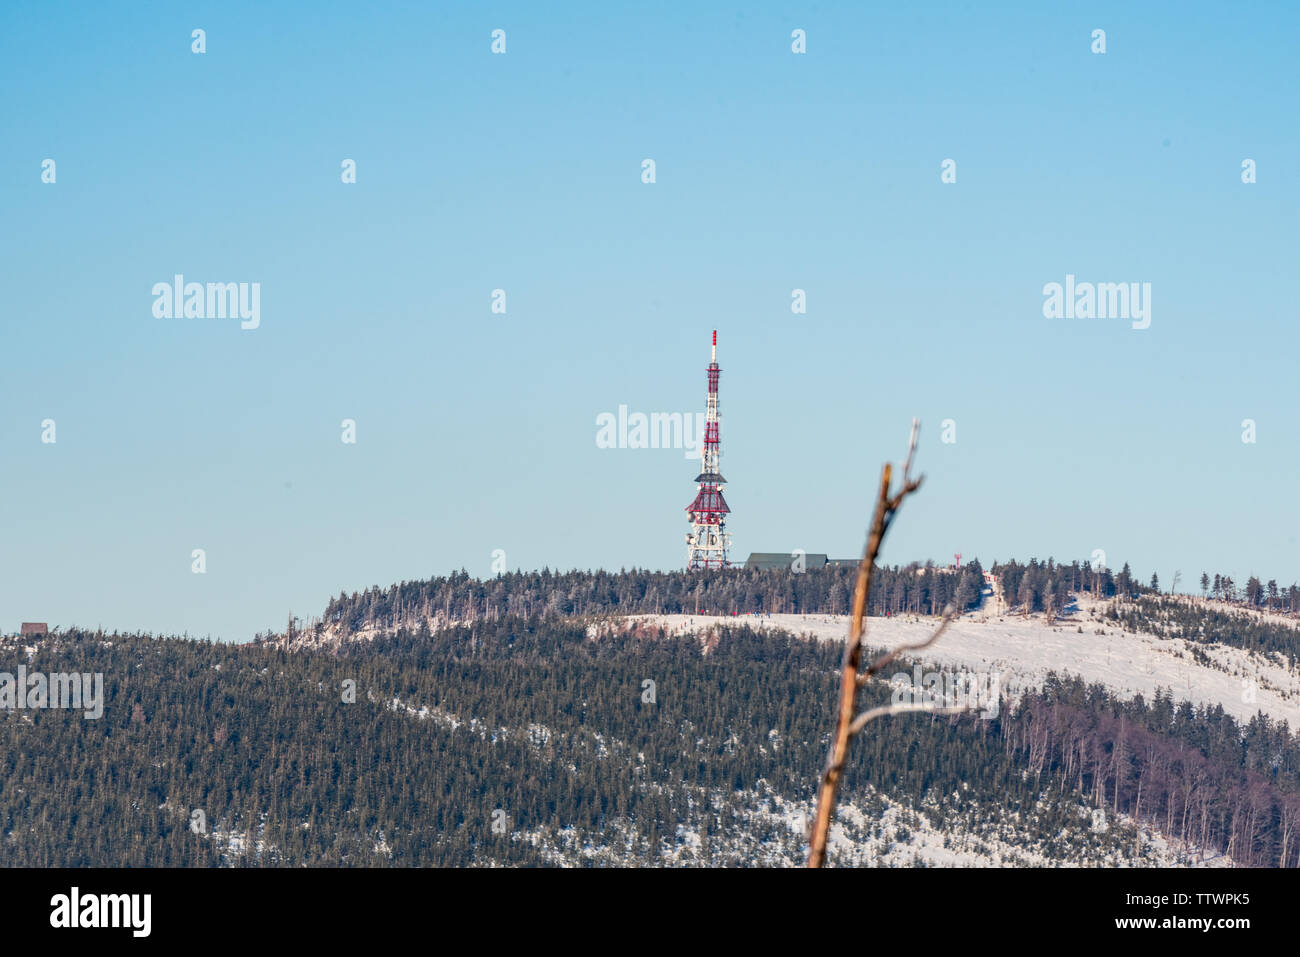 Skrzyczne hill with hut and communication tower from rock formation on Malinowska Skala hill in winter Beskid Slaski mountains in Poland Stock Photo